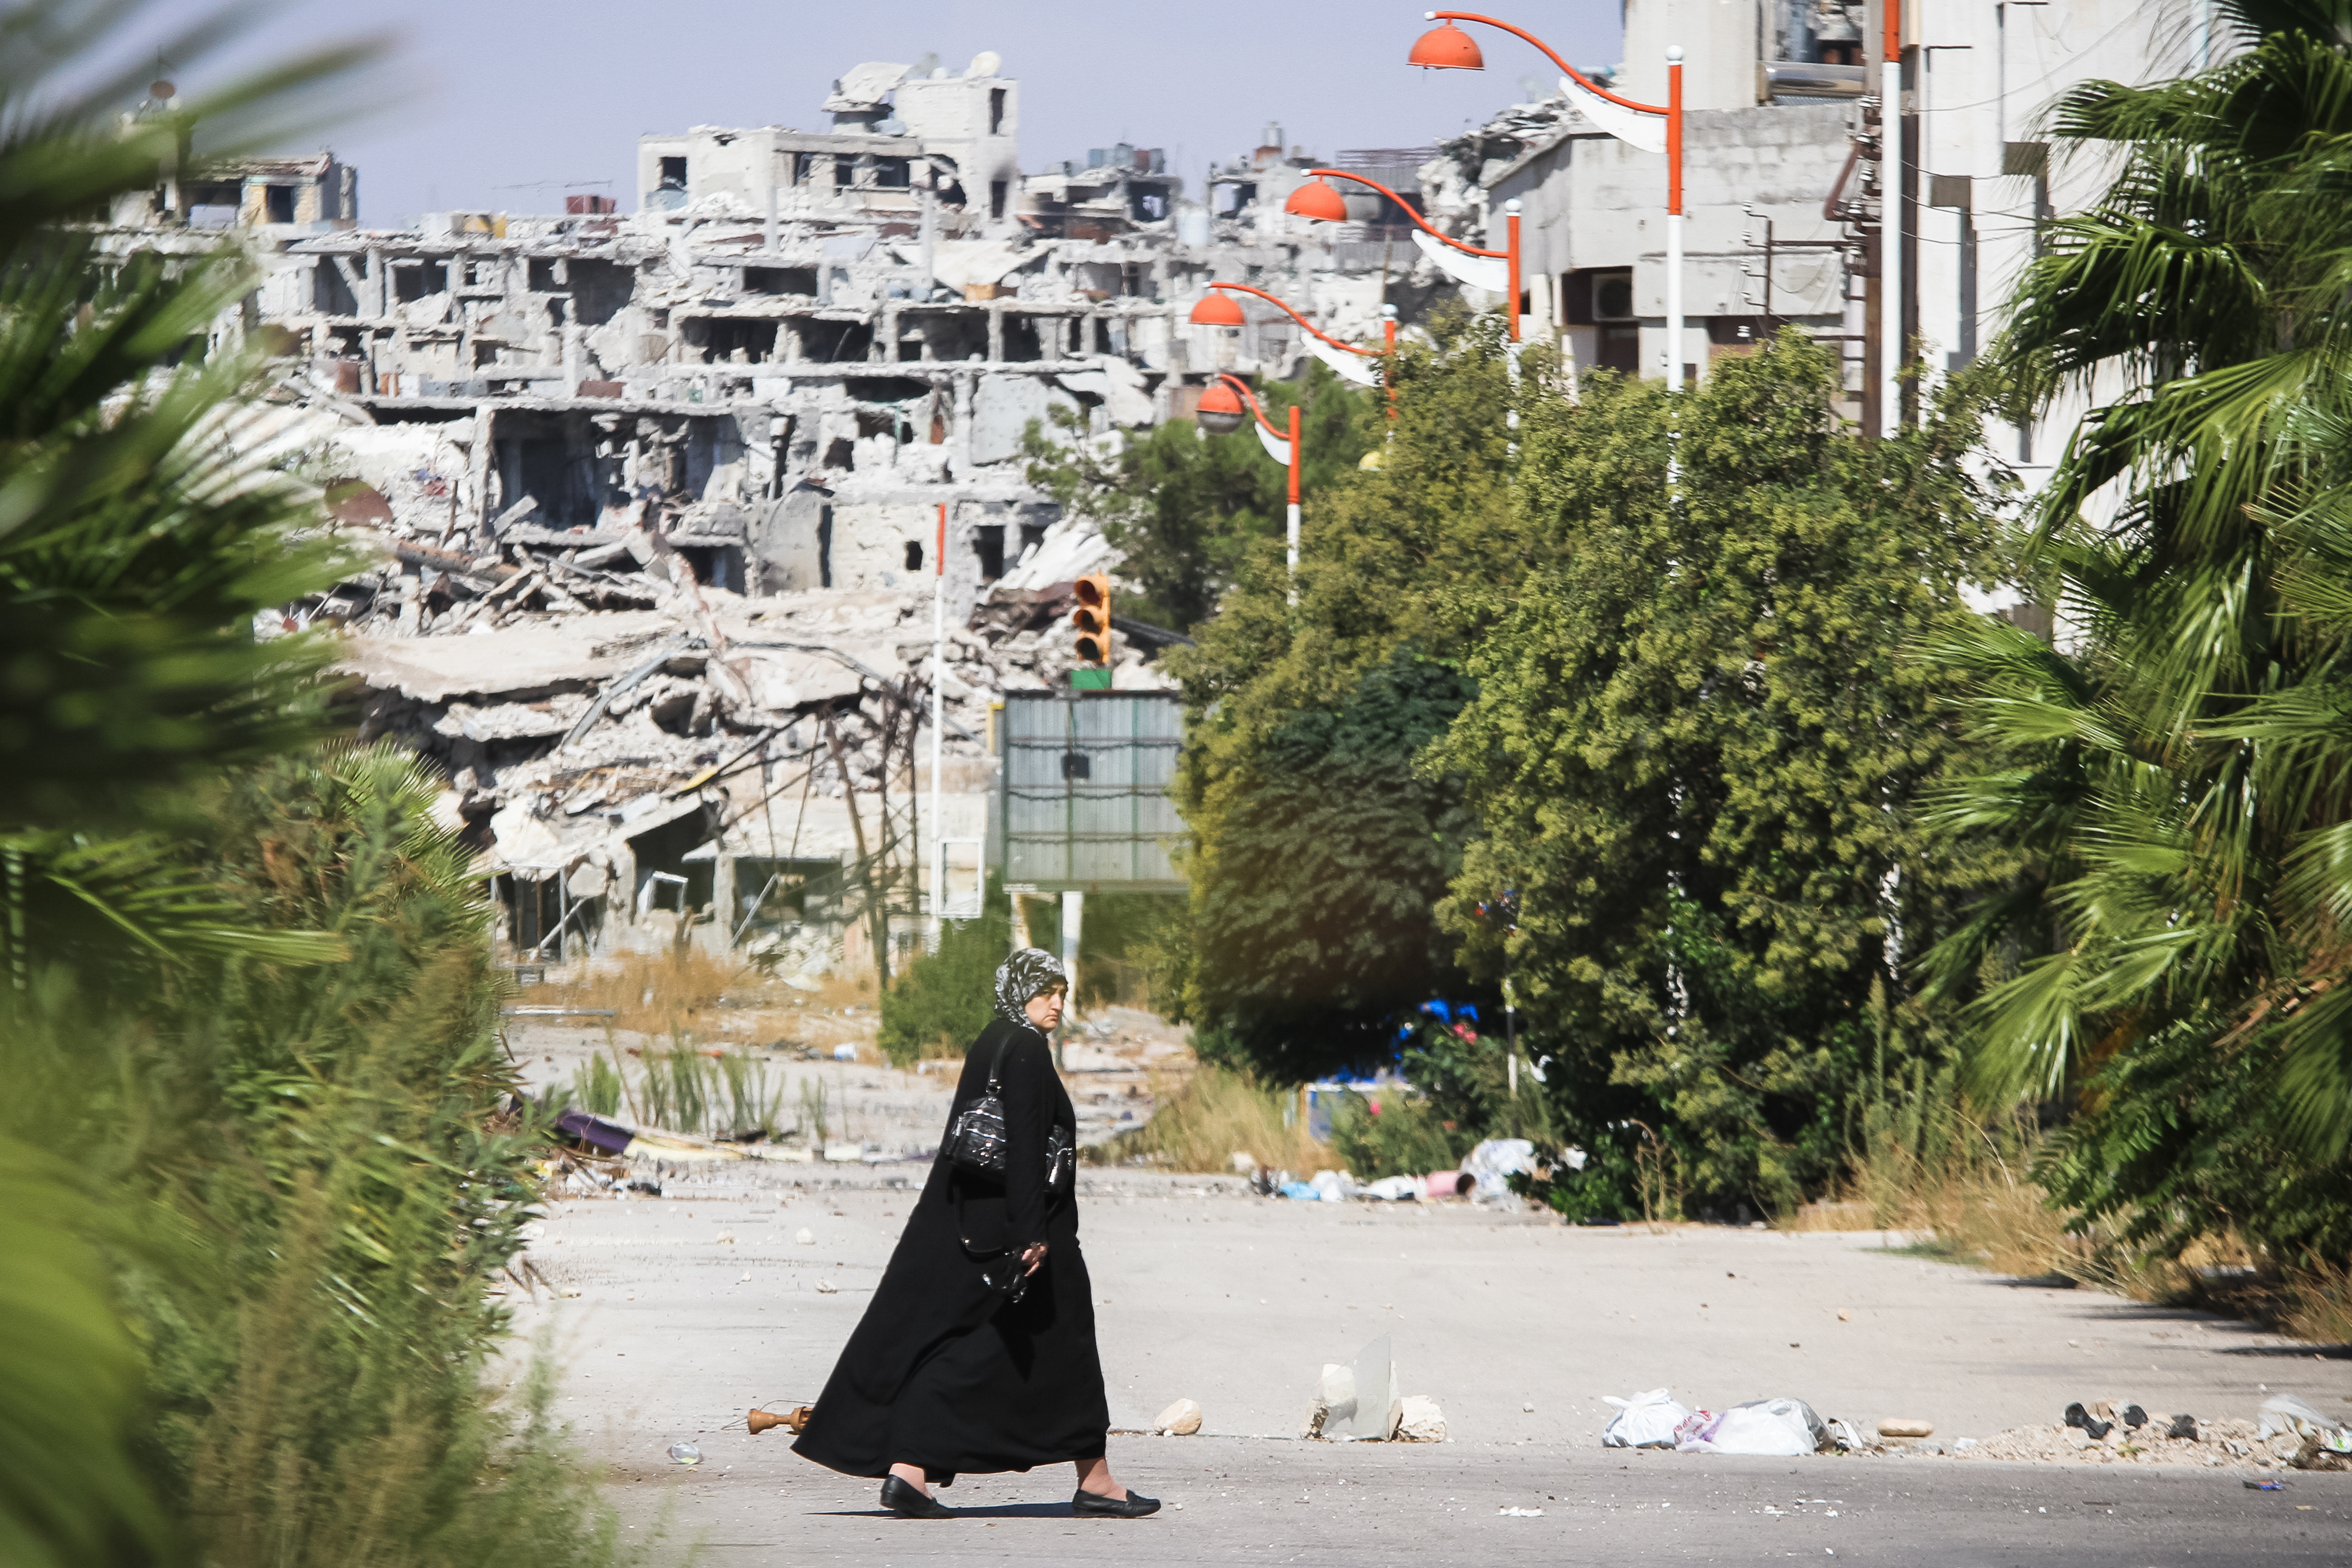 Homs, Syria - September 22, 2013: A woman walks near a residential area in the city of Homs destroyed in the fighting between the rebels of the Syrian National Army